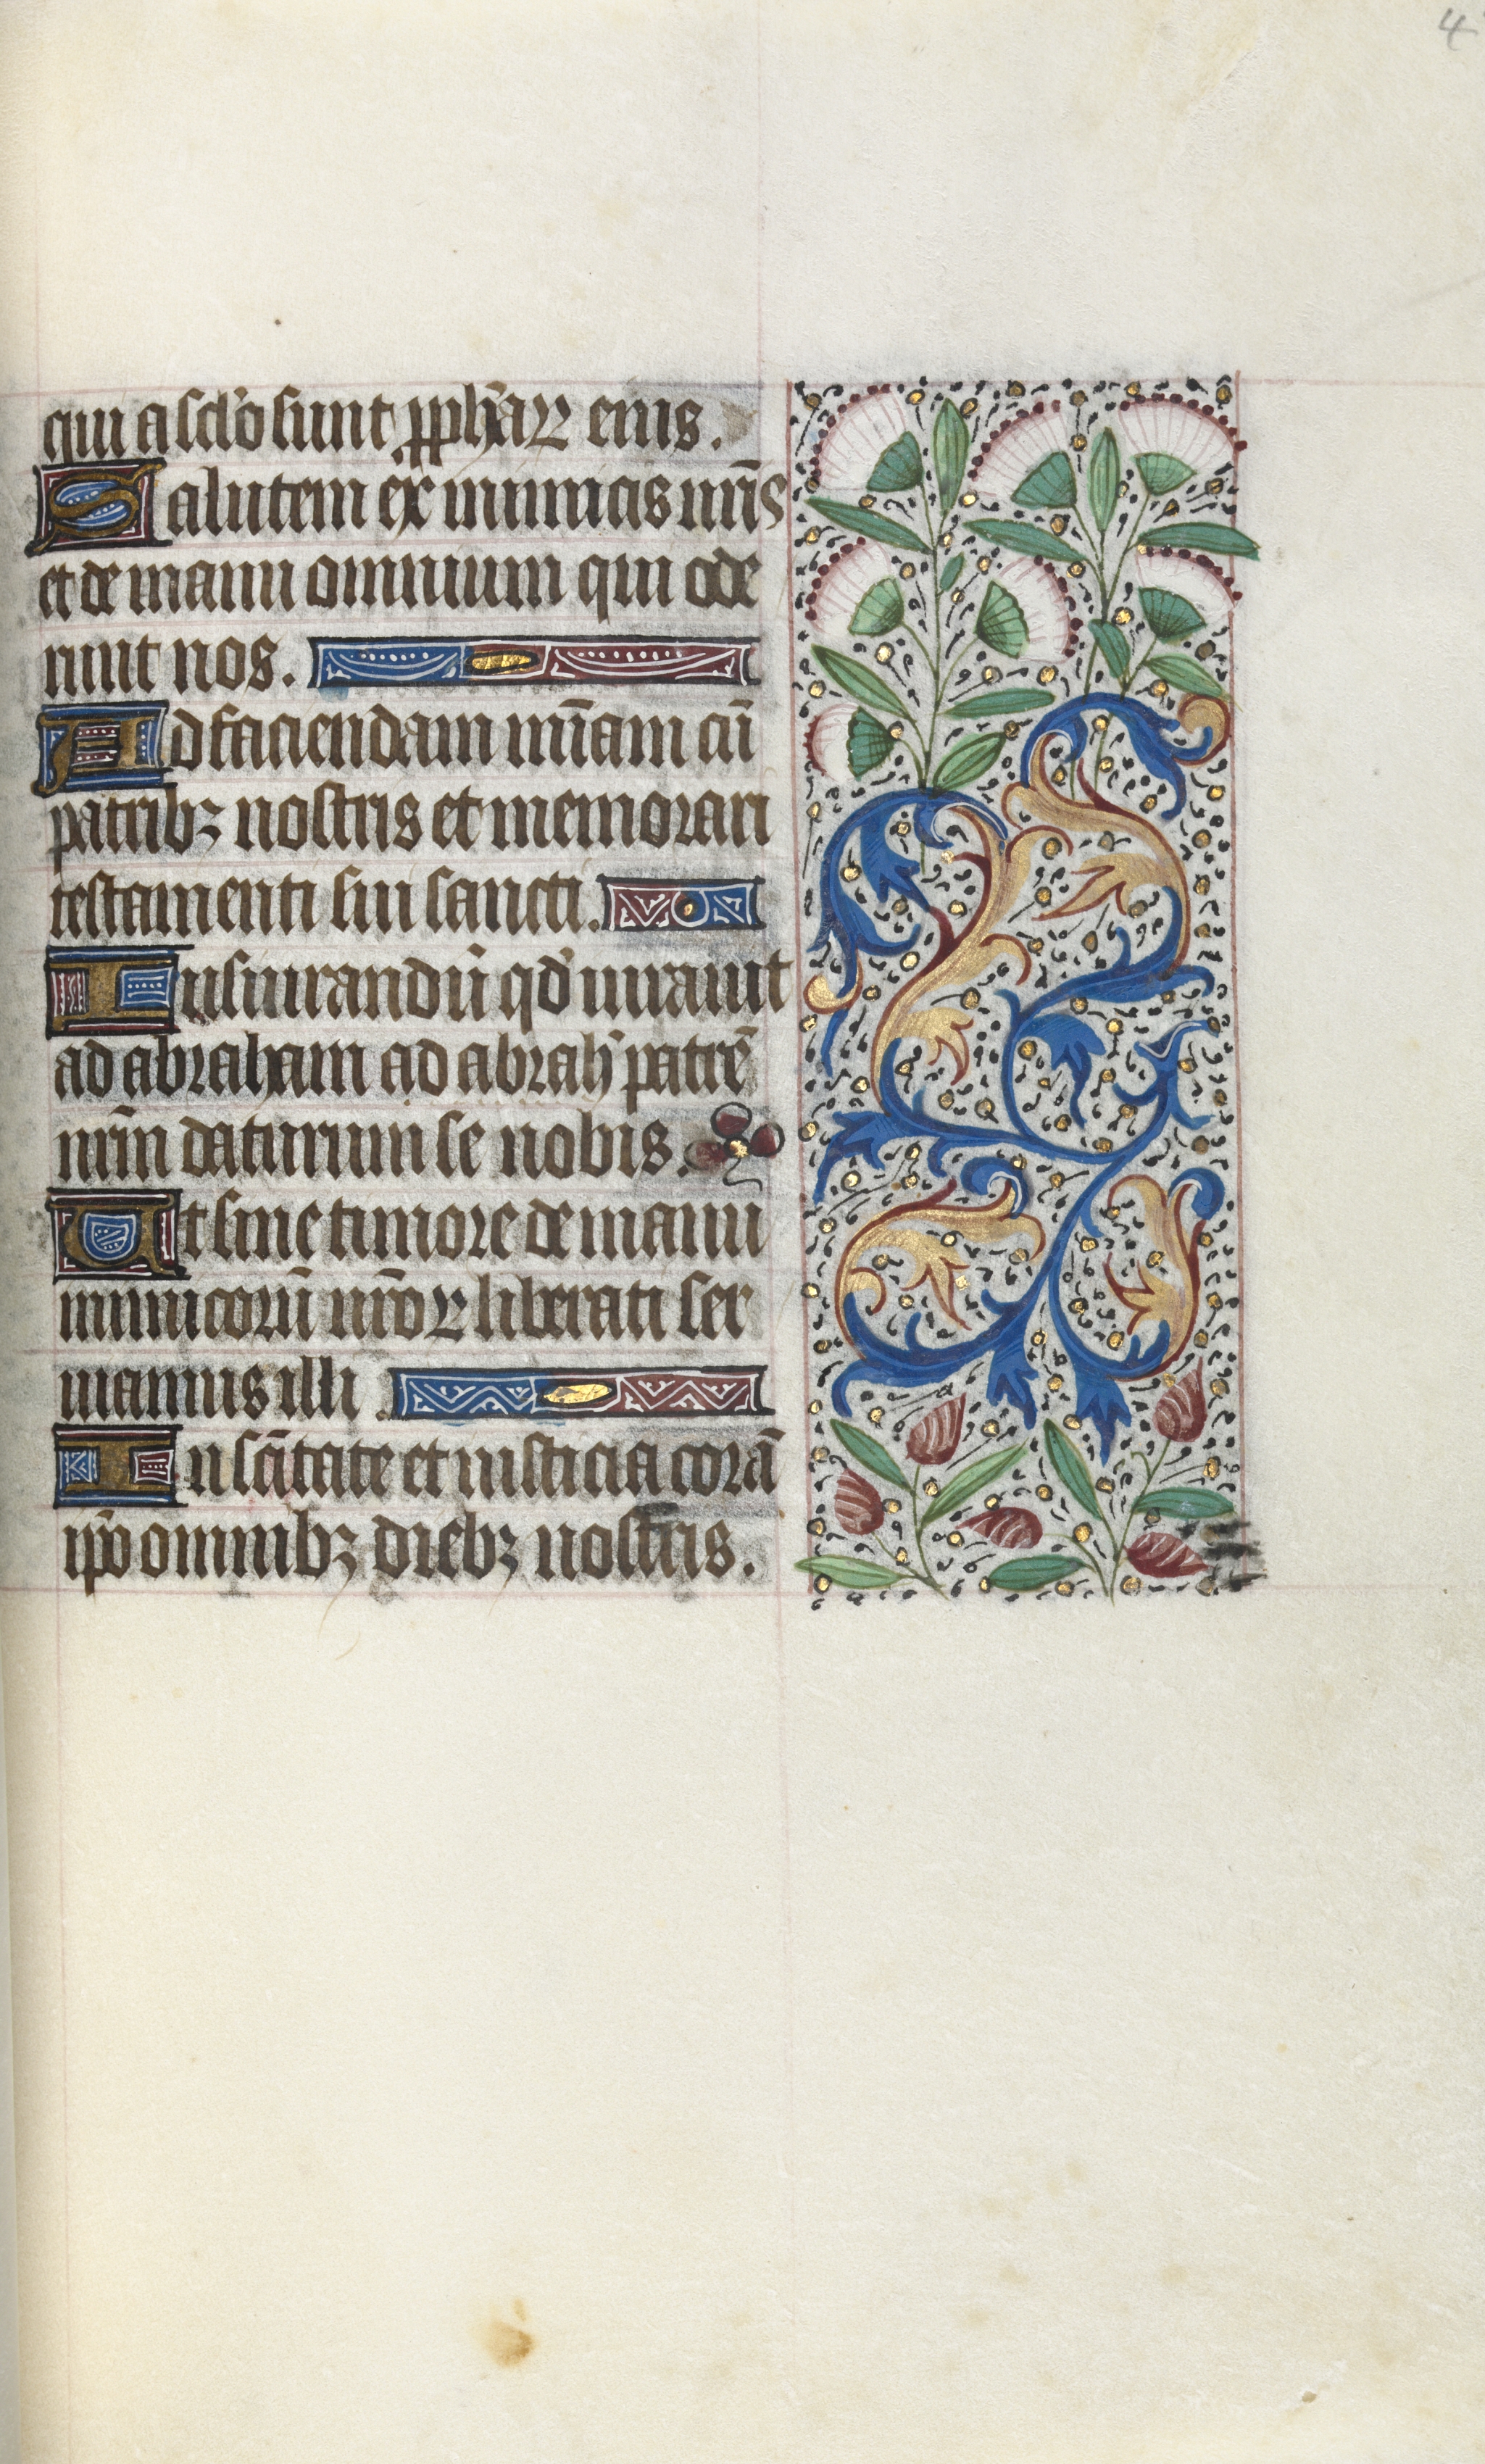 Book of Hours (Use of Rouen): fol. 48r